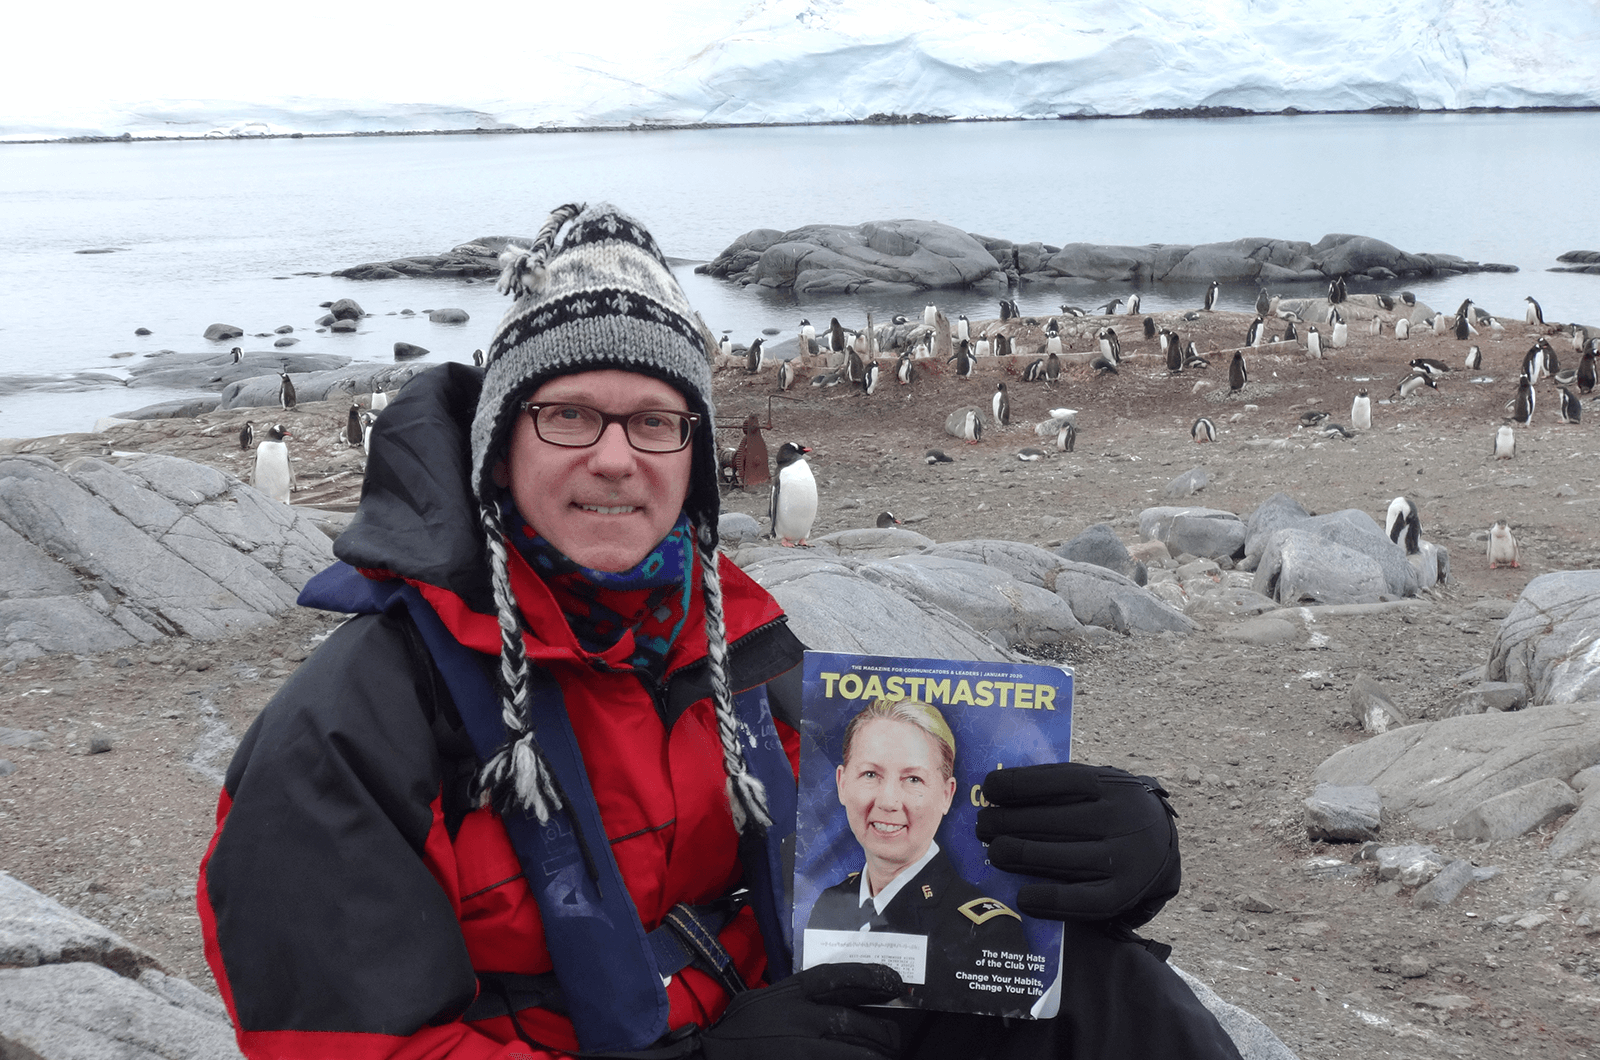 George Philip, DTM, of North Brunswick, New Jersey, U.S., poses with some penguins at Port Lockroy—a historic British base and the most southerly operational post office in the world—on Wiencke Island, off the coast of the Antarctic Peninsula.